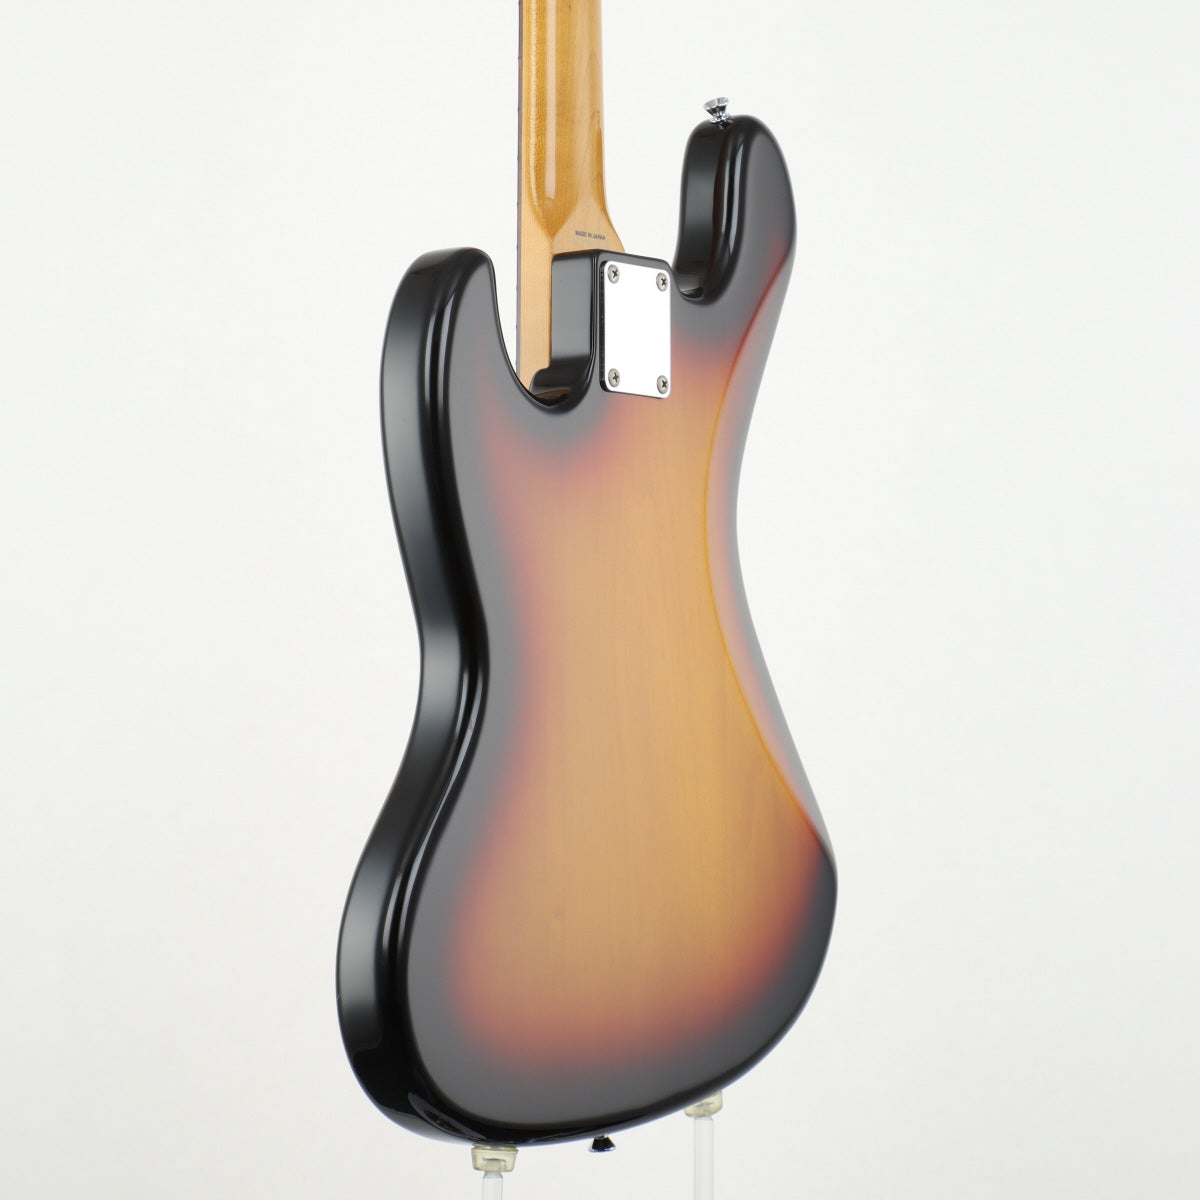 [SN JD16019401] USED Fender Fender / Japan Exclusive Series Classic 60s Jazz Bass 3TS [20]